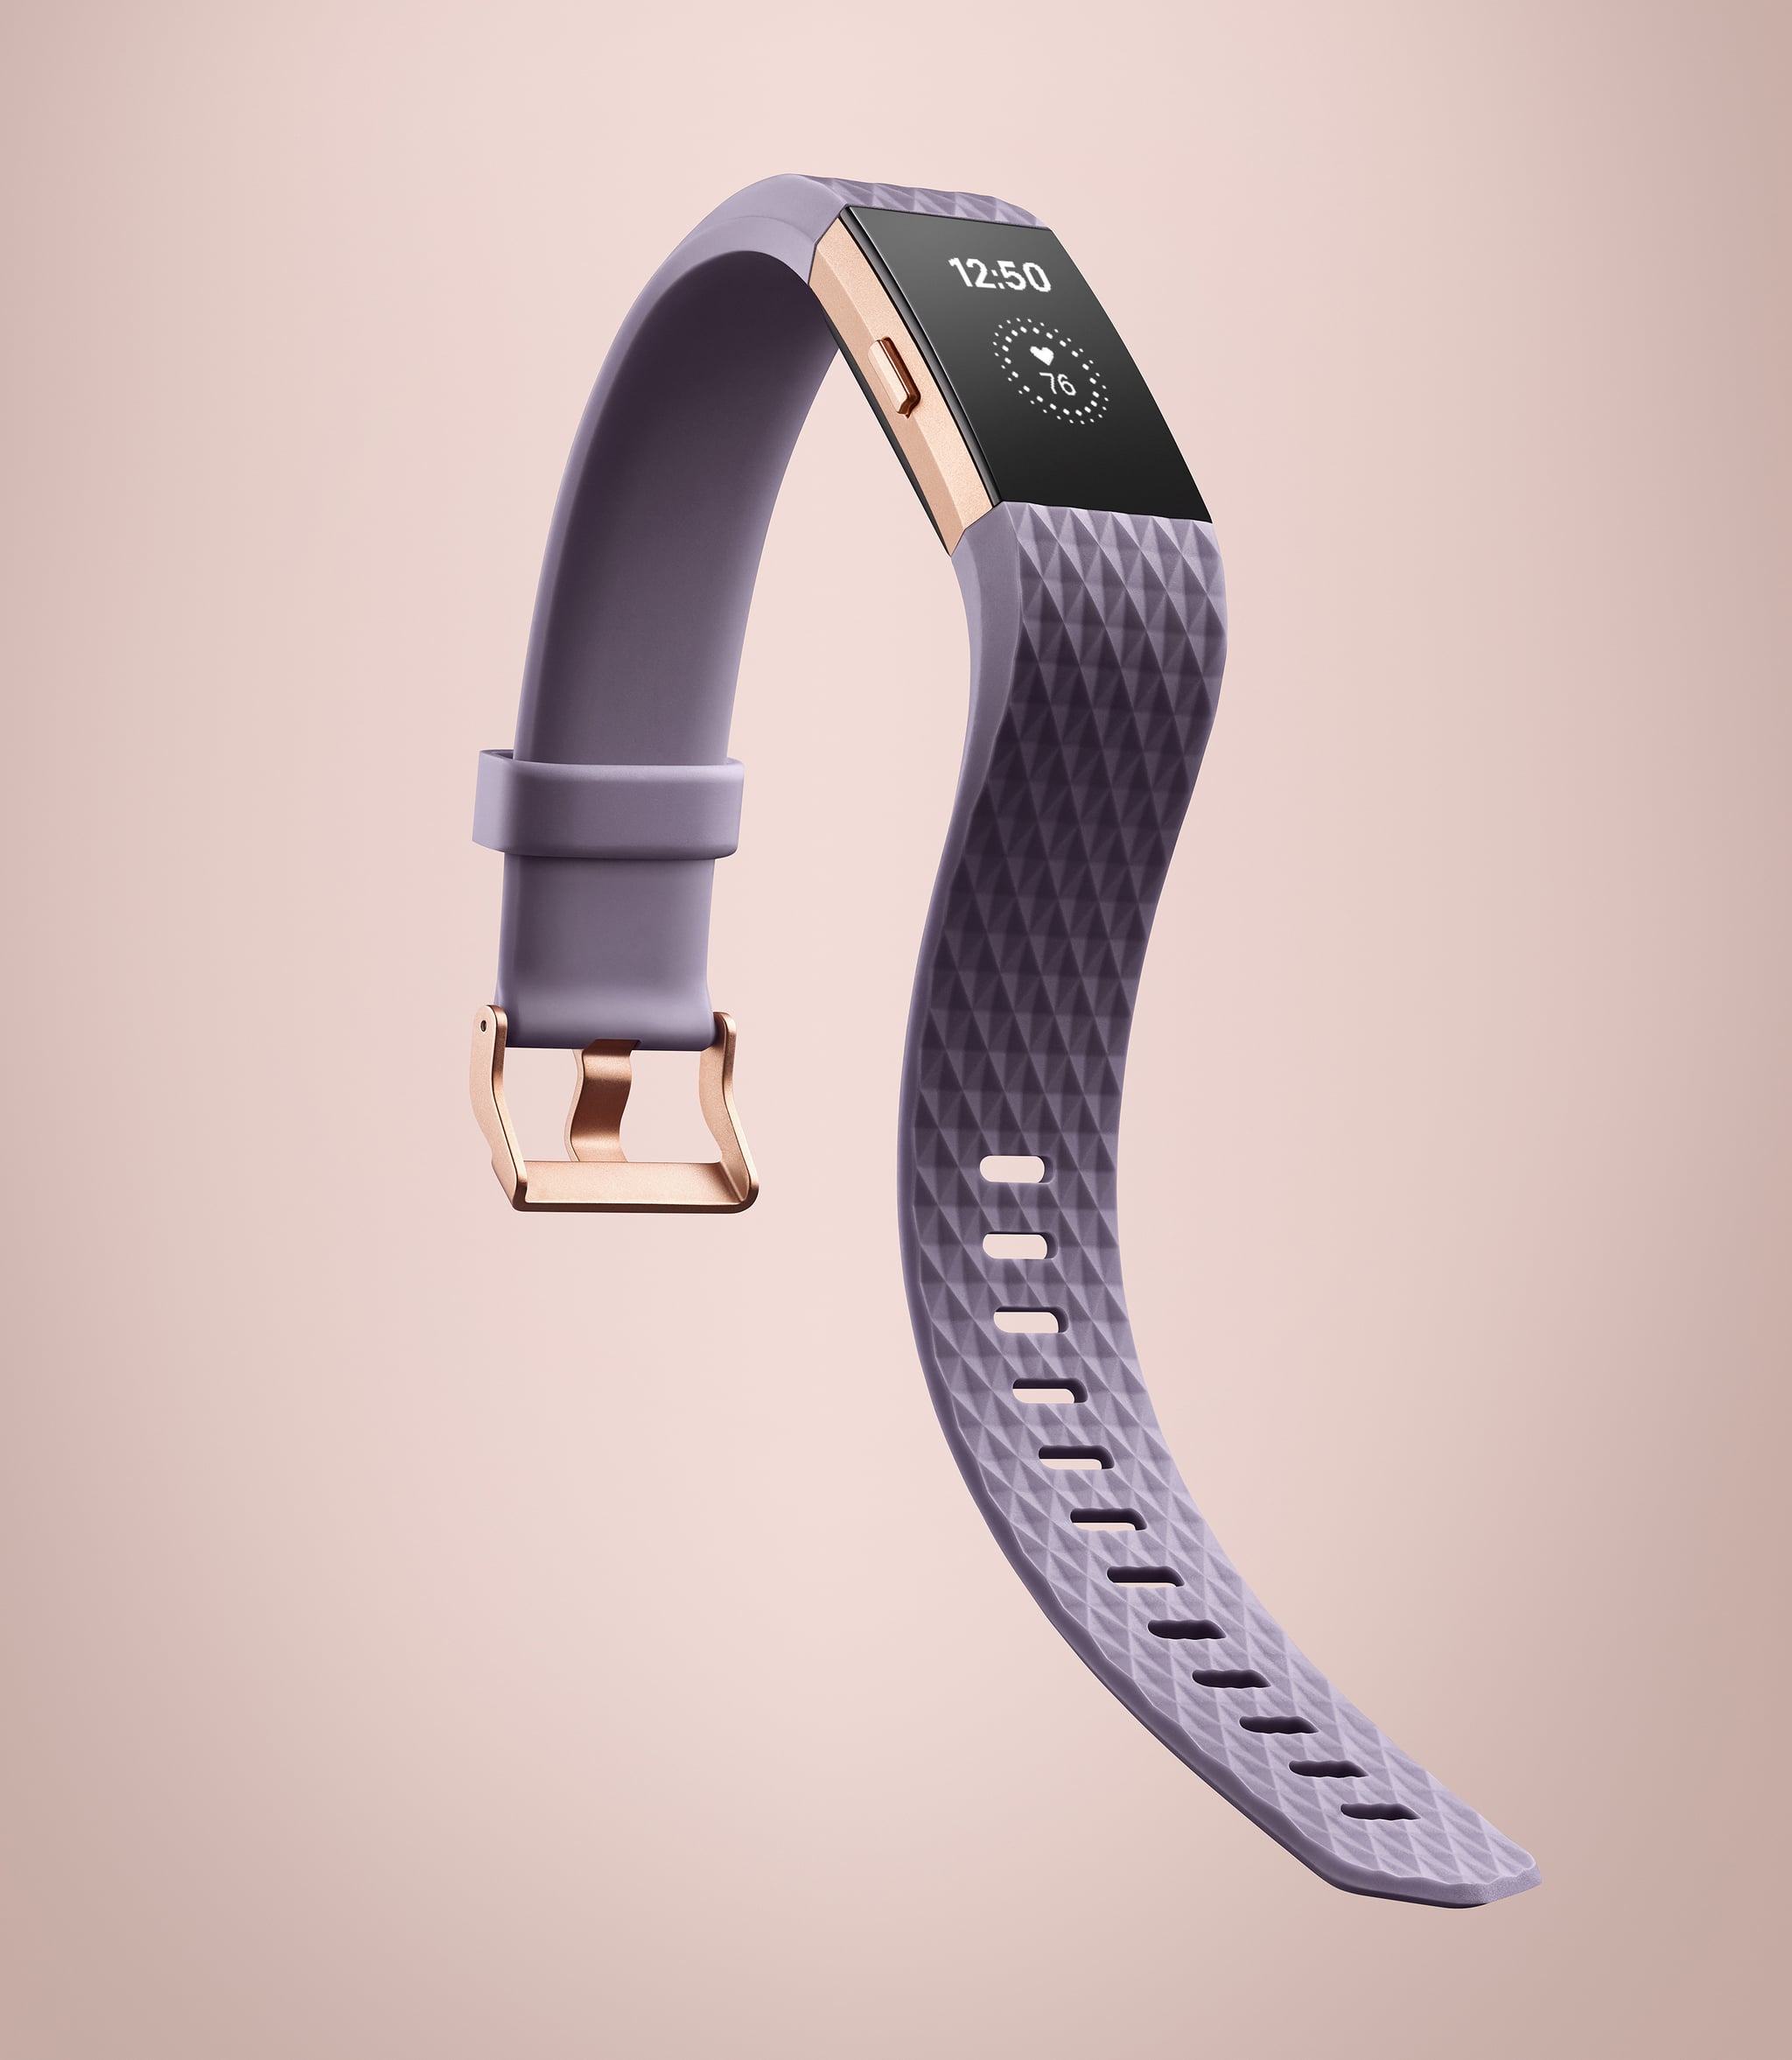 rose gold fitbit charge 2